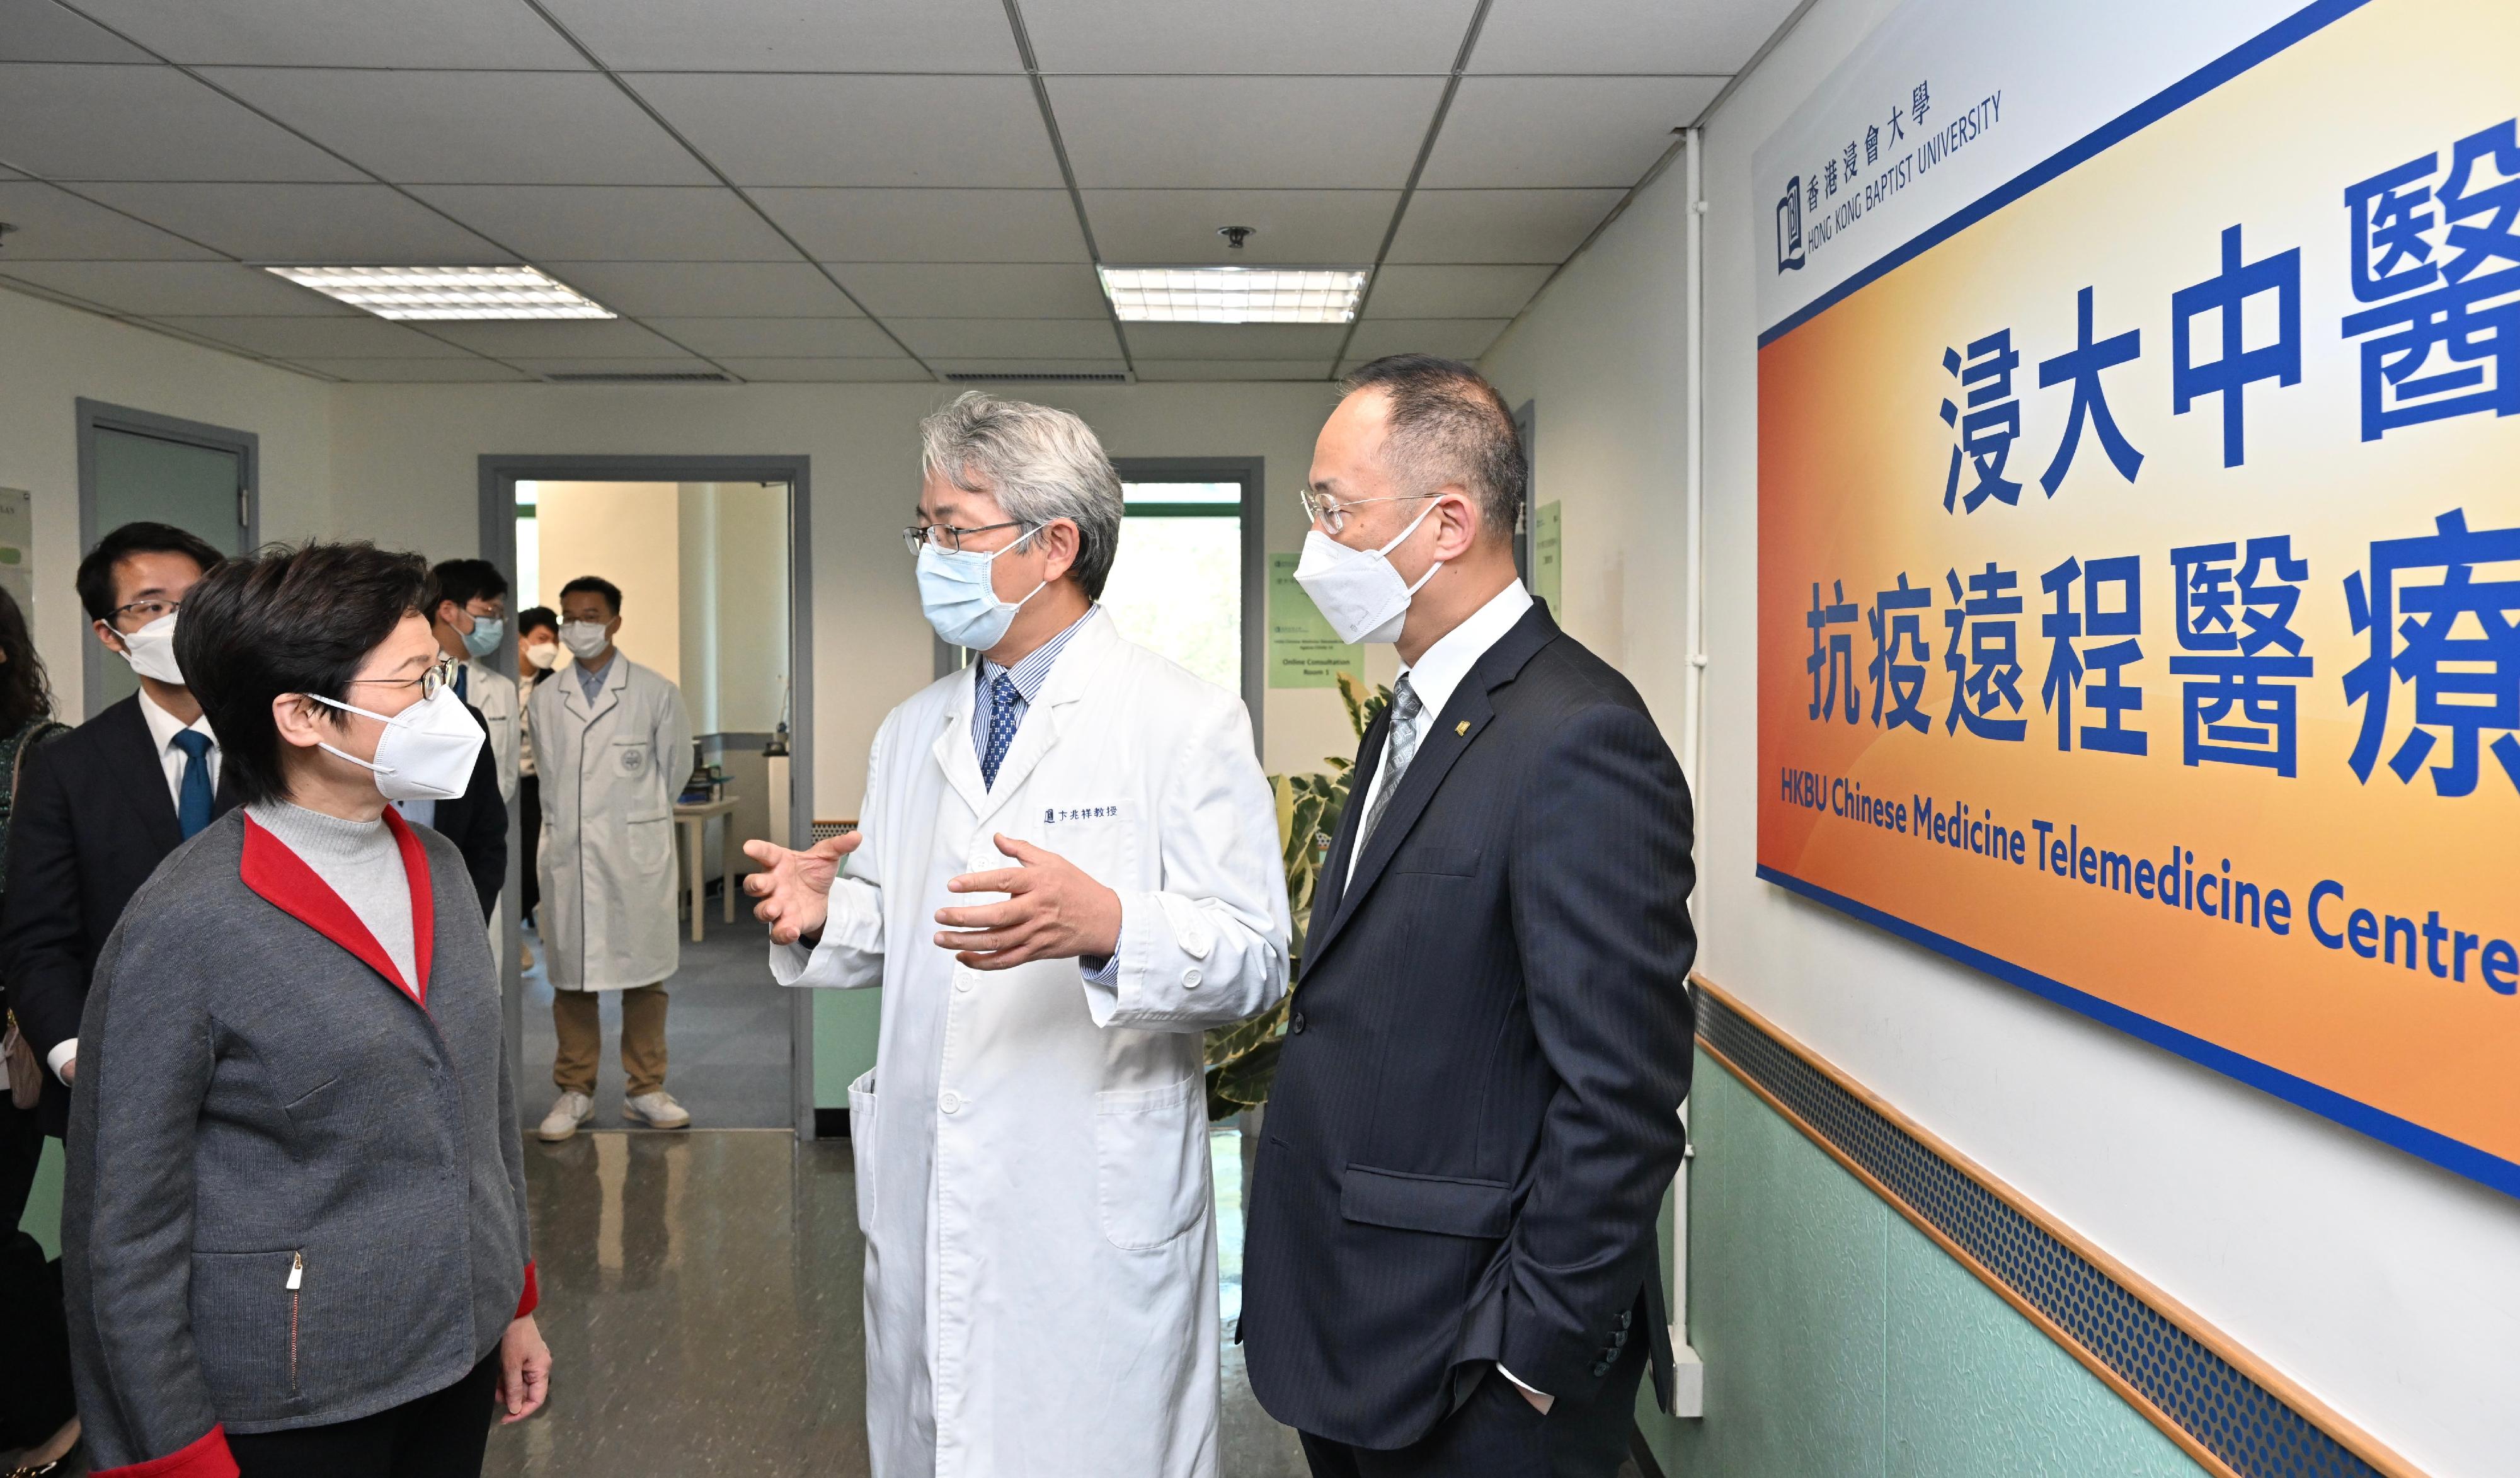 The Chief Executive, Mrs Carrie Lam, visited the Chinese Medicine Telemedicine Centre Against COVID-19 of the Hong Kong Baptist University (HKBU) today (March 12). Photo shows Mrs Lam (first left) being briefed by the President and Vice-Chancellor of HKBU, Professor Alexander Wai (first right) and the Associate Vice-President (Chinese Medicine Development) and Director of the Clinical Division of the School of Chinese Medicine of HKBU, Professor Bian Zhaoxiang (second right) on the Centre's service.